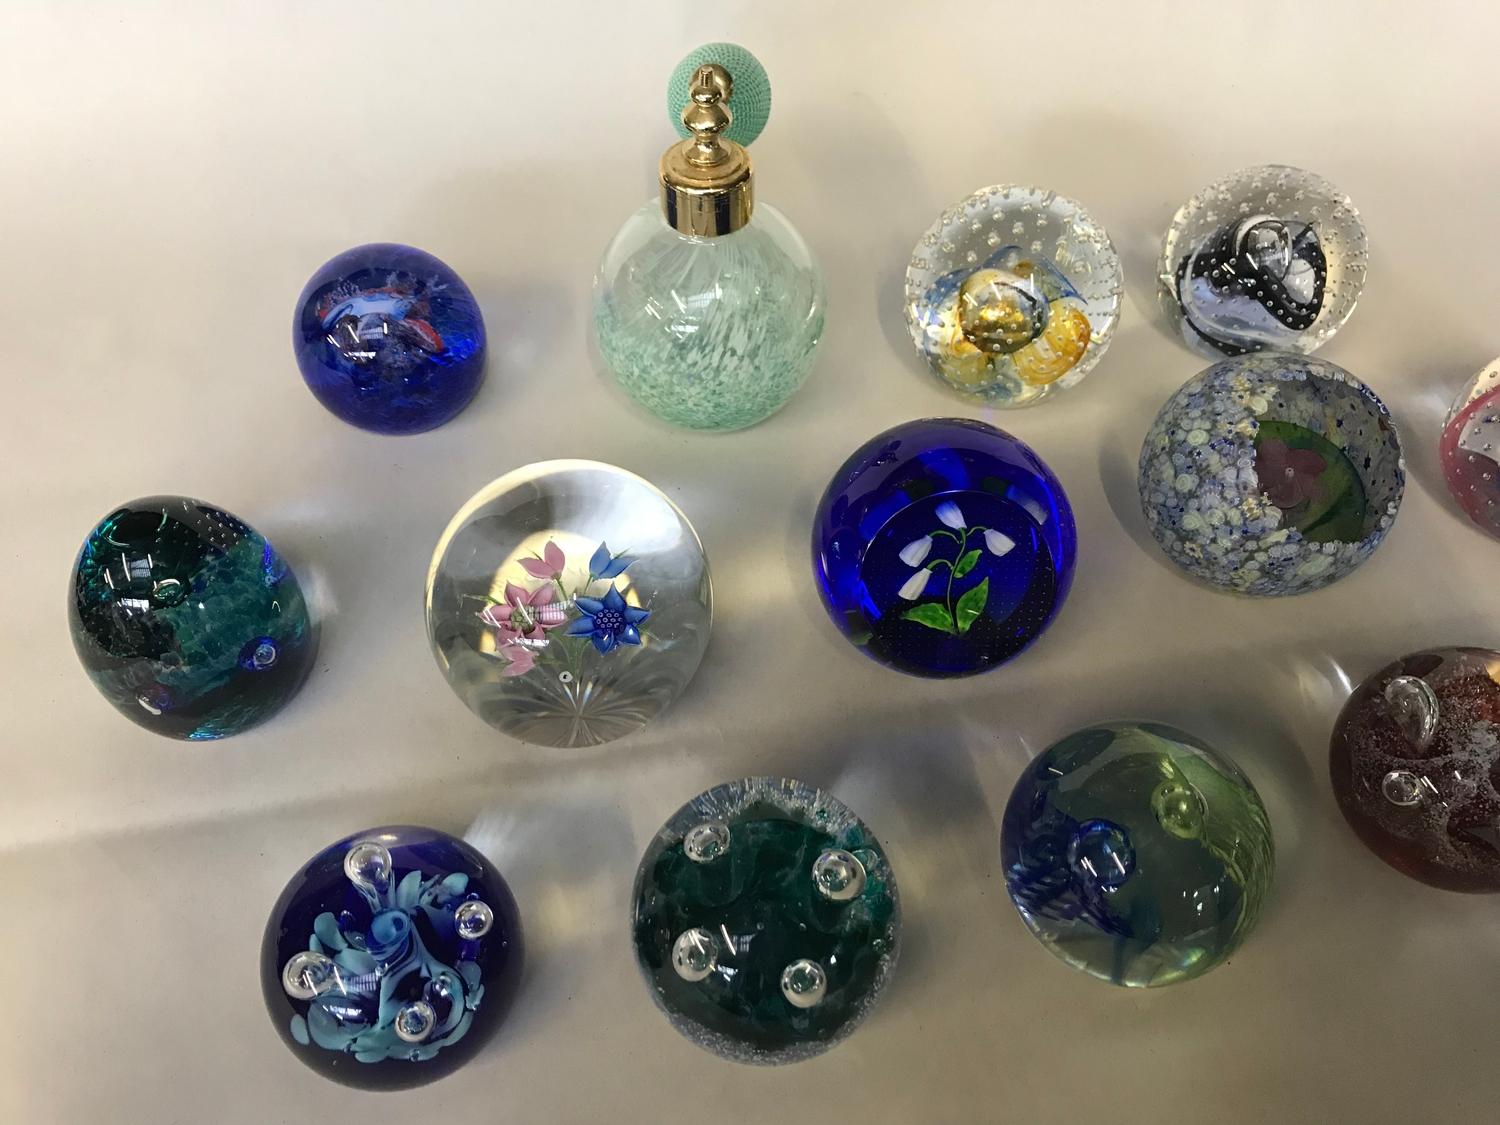 A Collection of 13 Caithness Scottish paperweights and Caithness perfume atomiser. Paperweights